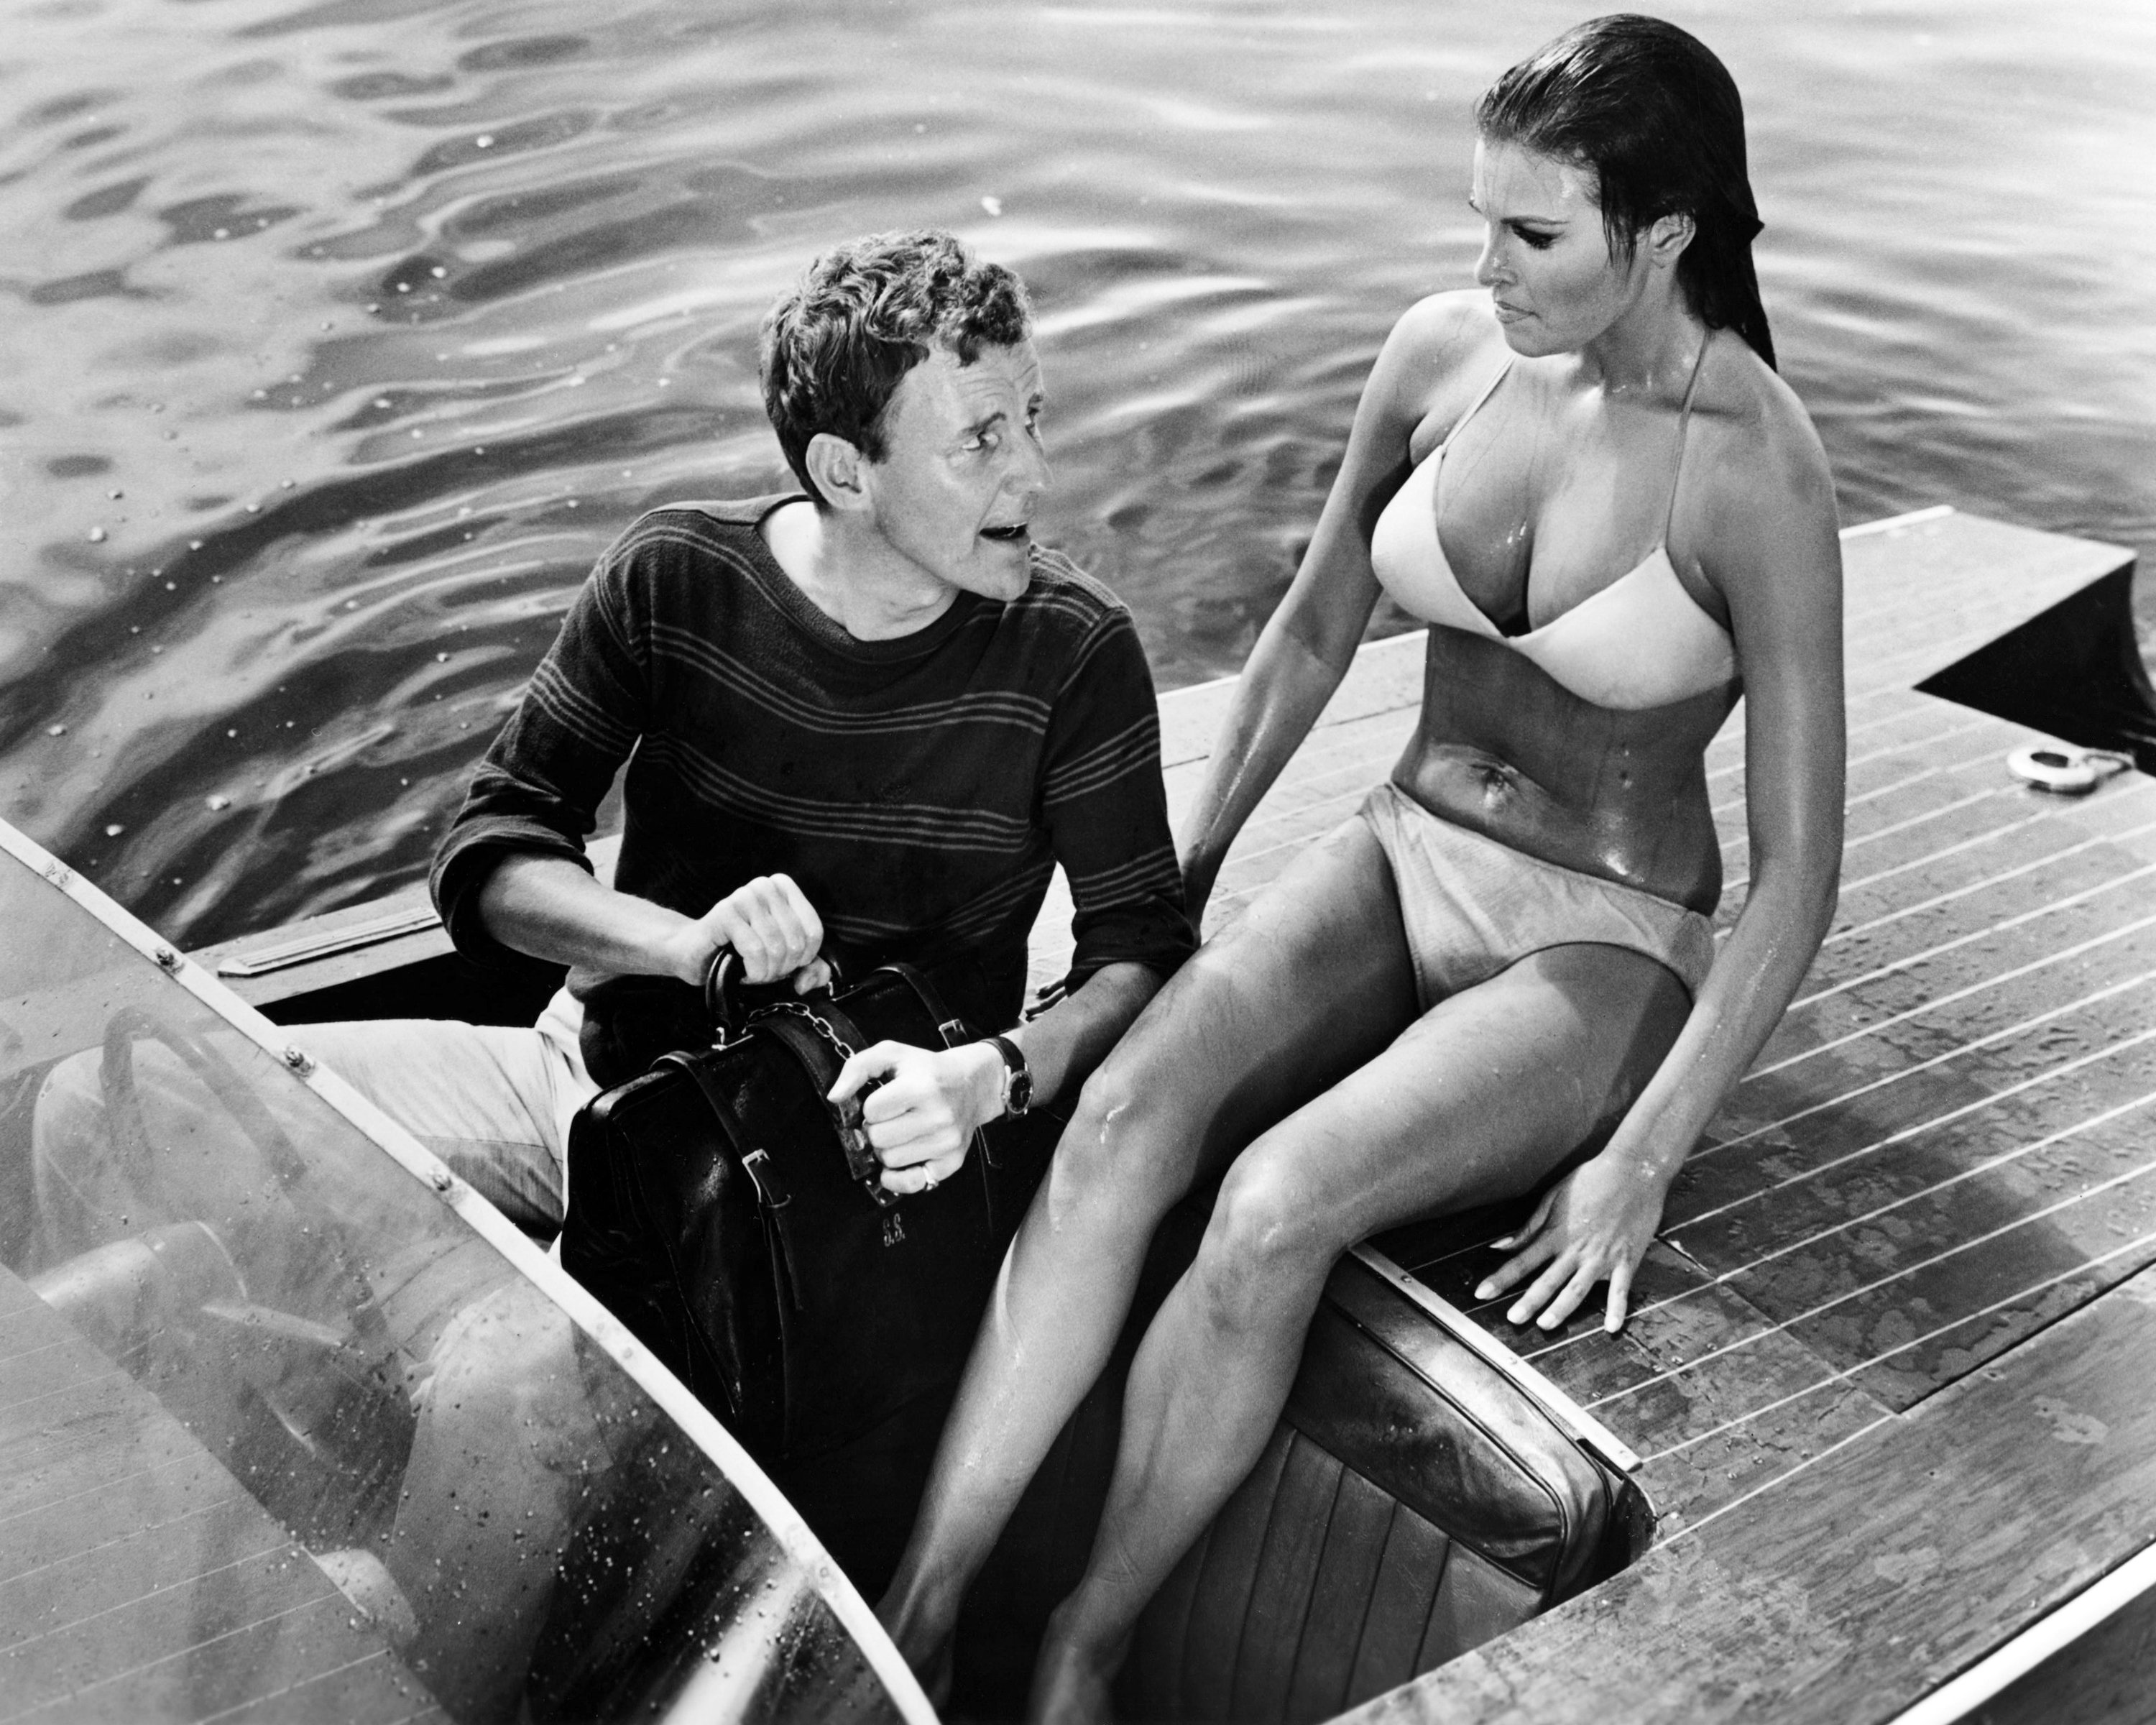 Richard Briers and Raquel Welch in "Fathom" in 1967. | Source: Getty Images